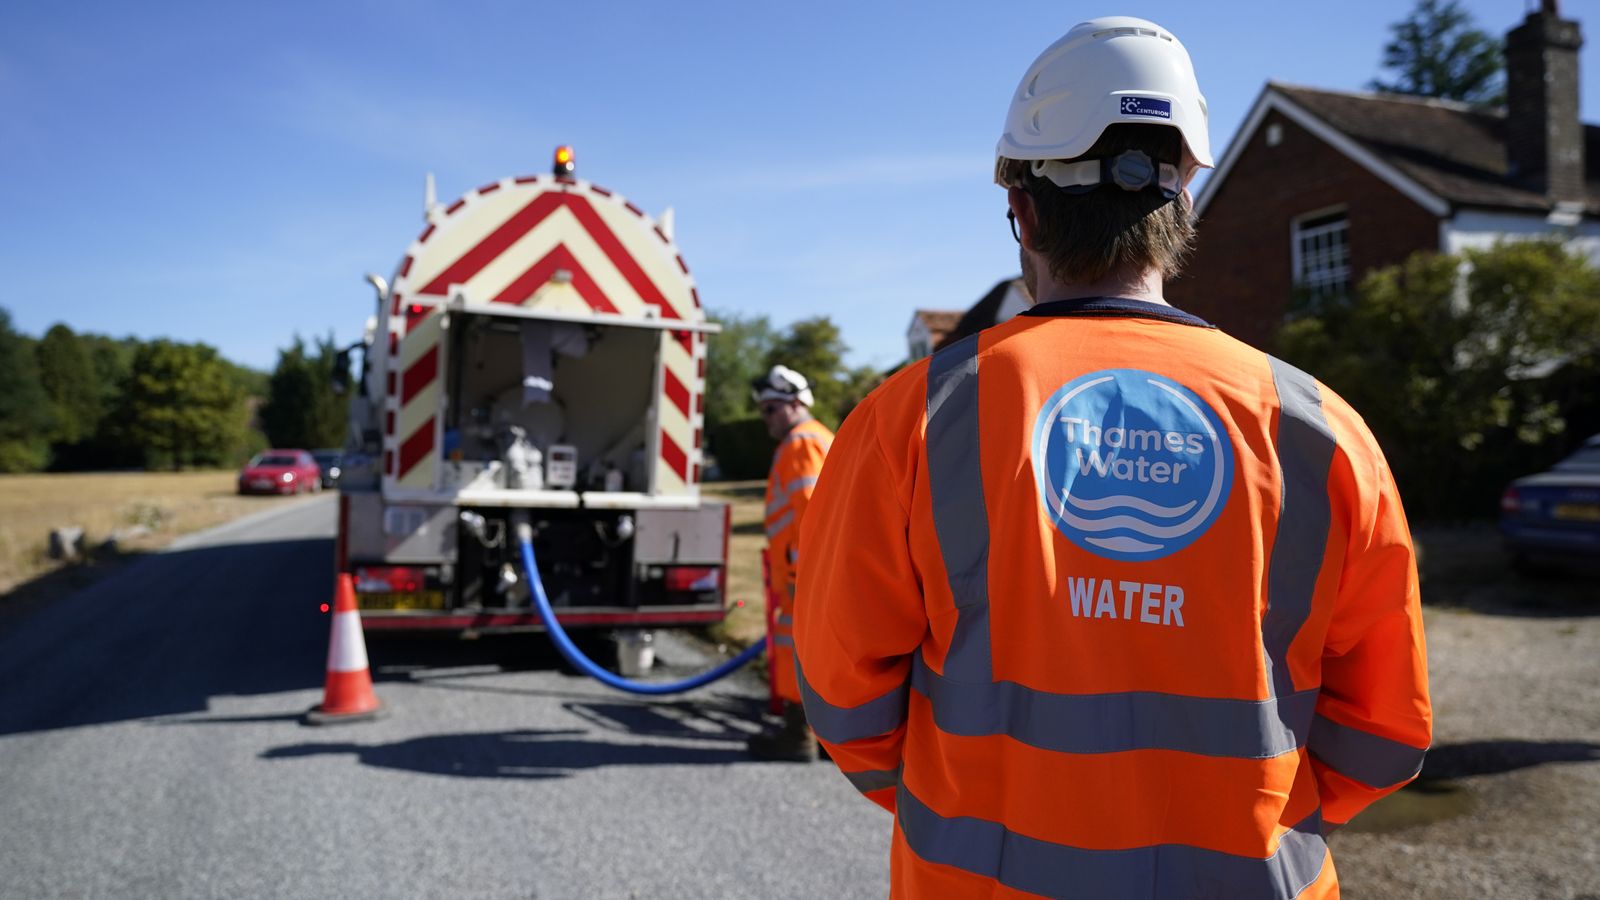 Thames Water boss refuses to rule out bill increases of up to 40% to secure company's future